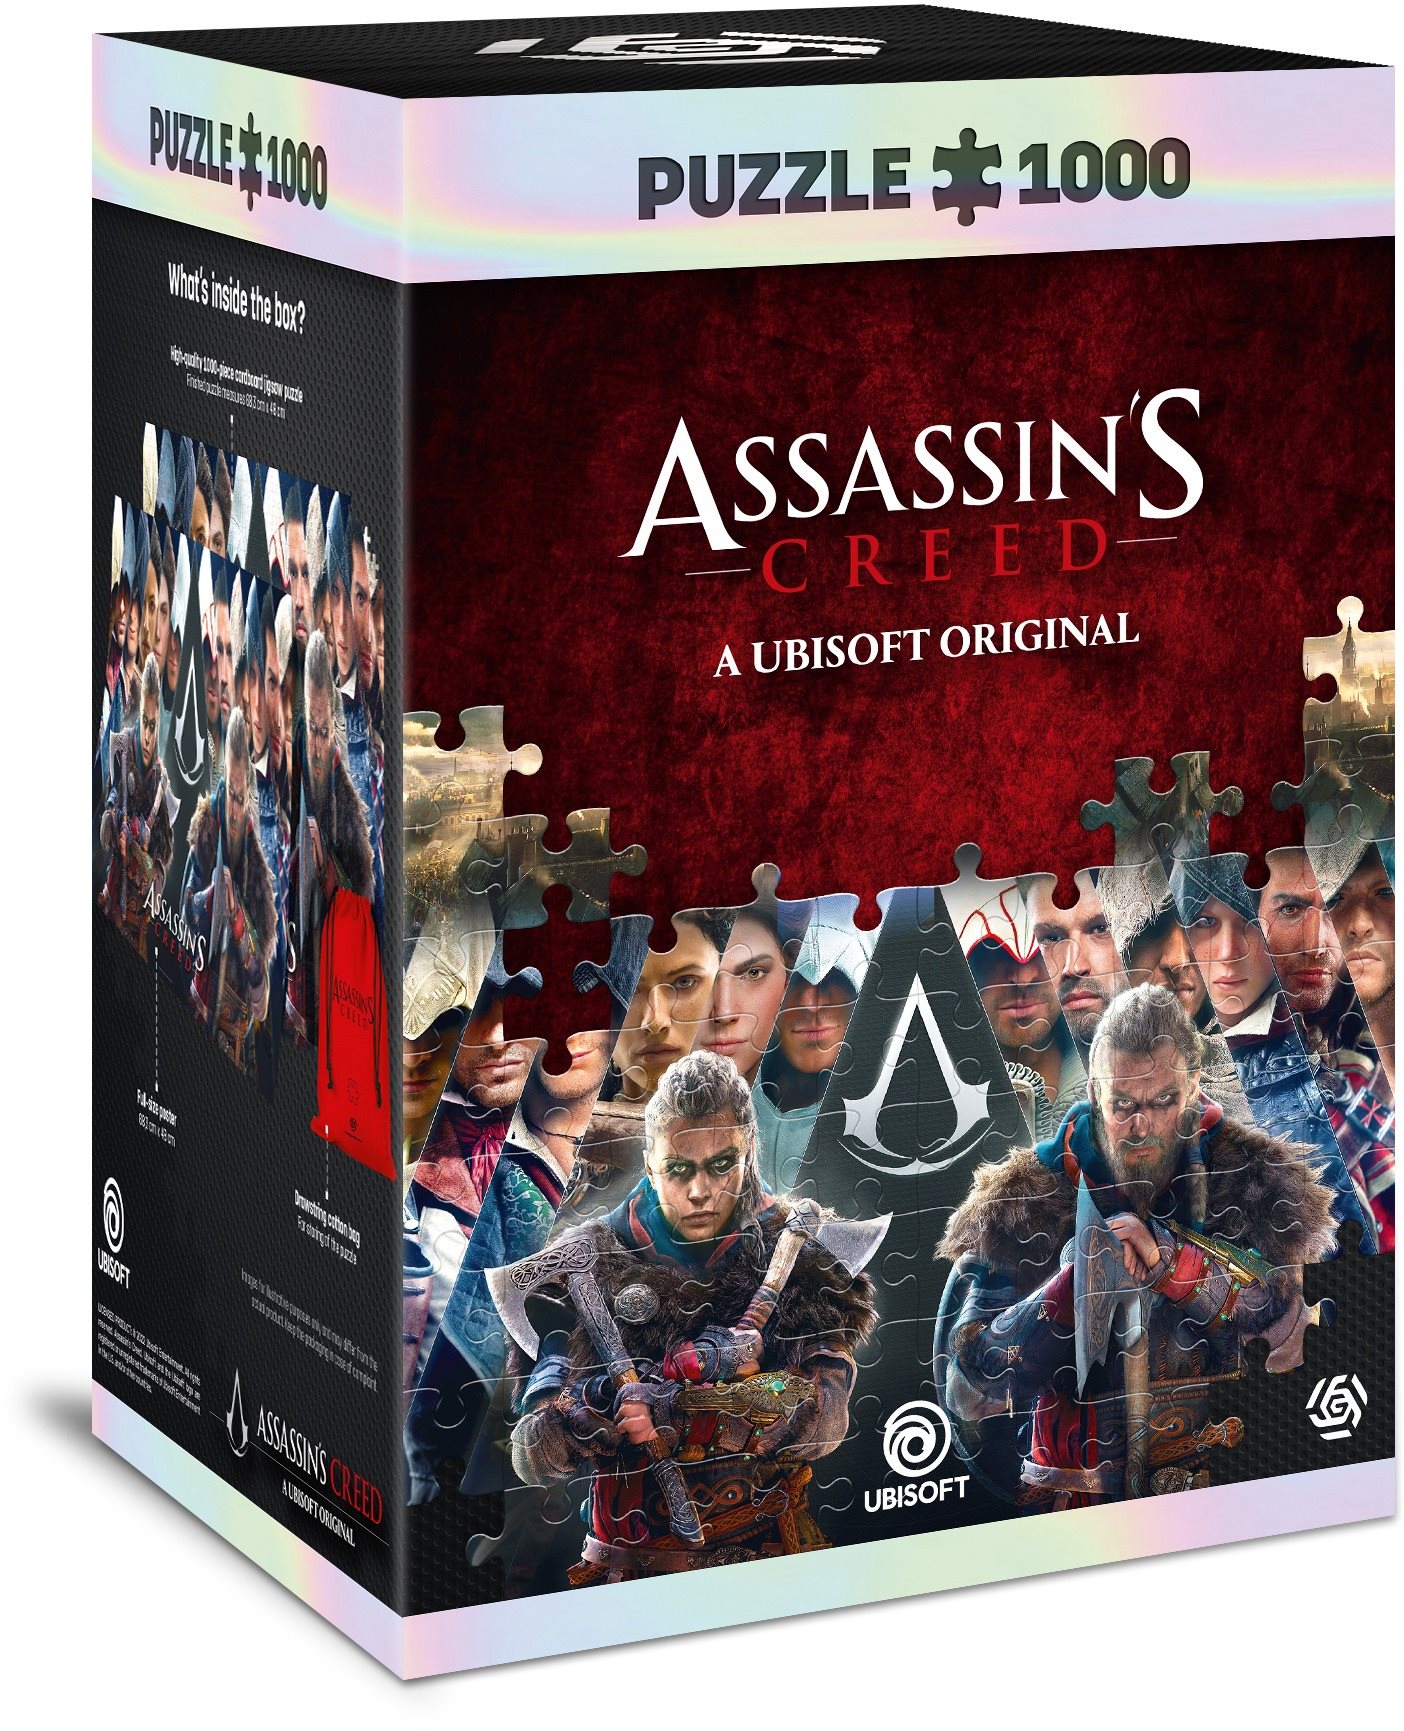 Assassins Creed: Legacy - Puzzle